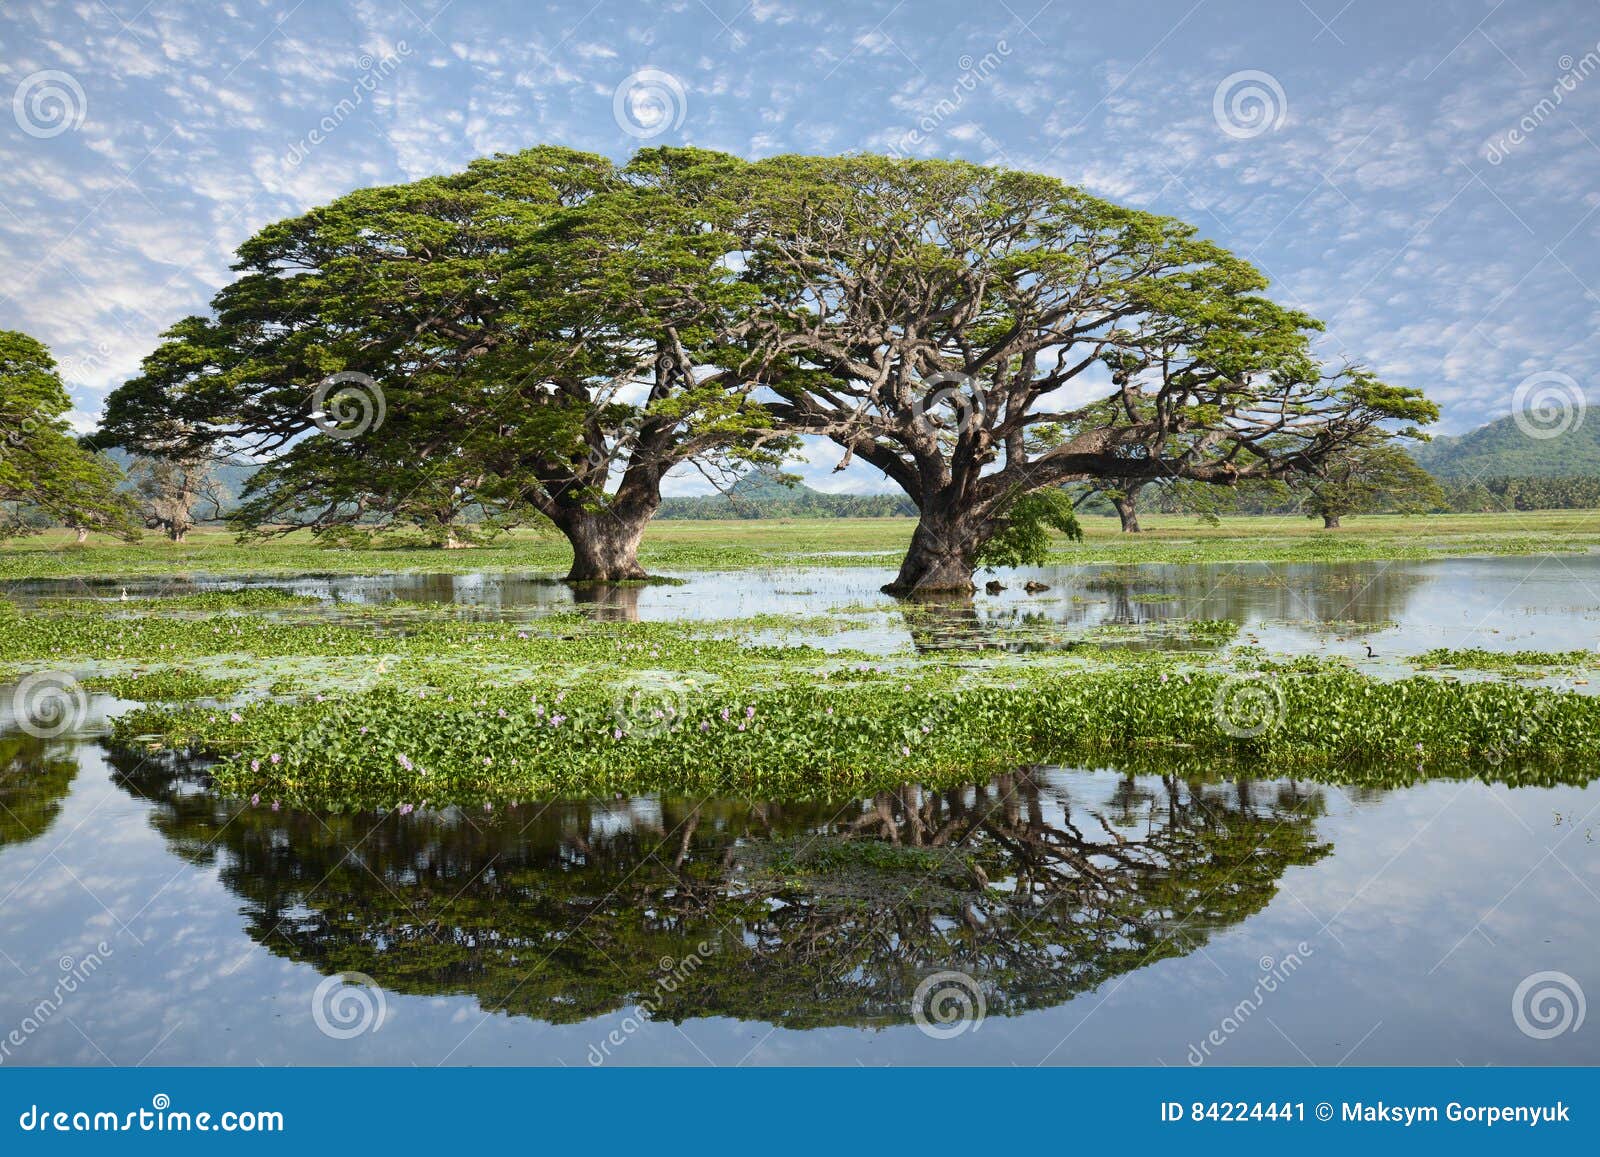 lake landscape - gigantic trees with water reflection